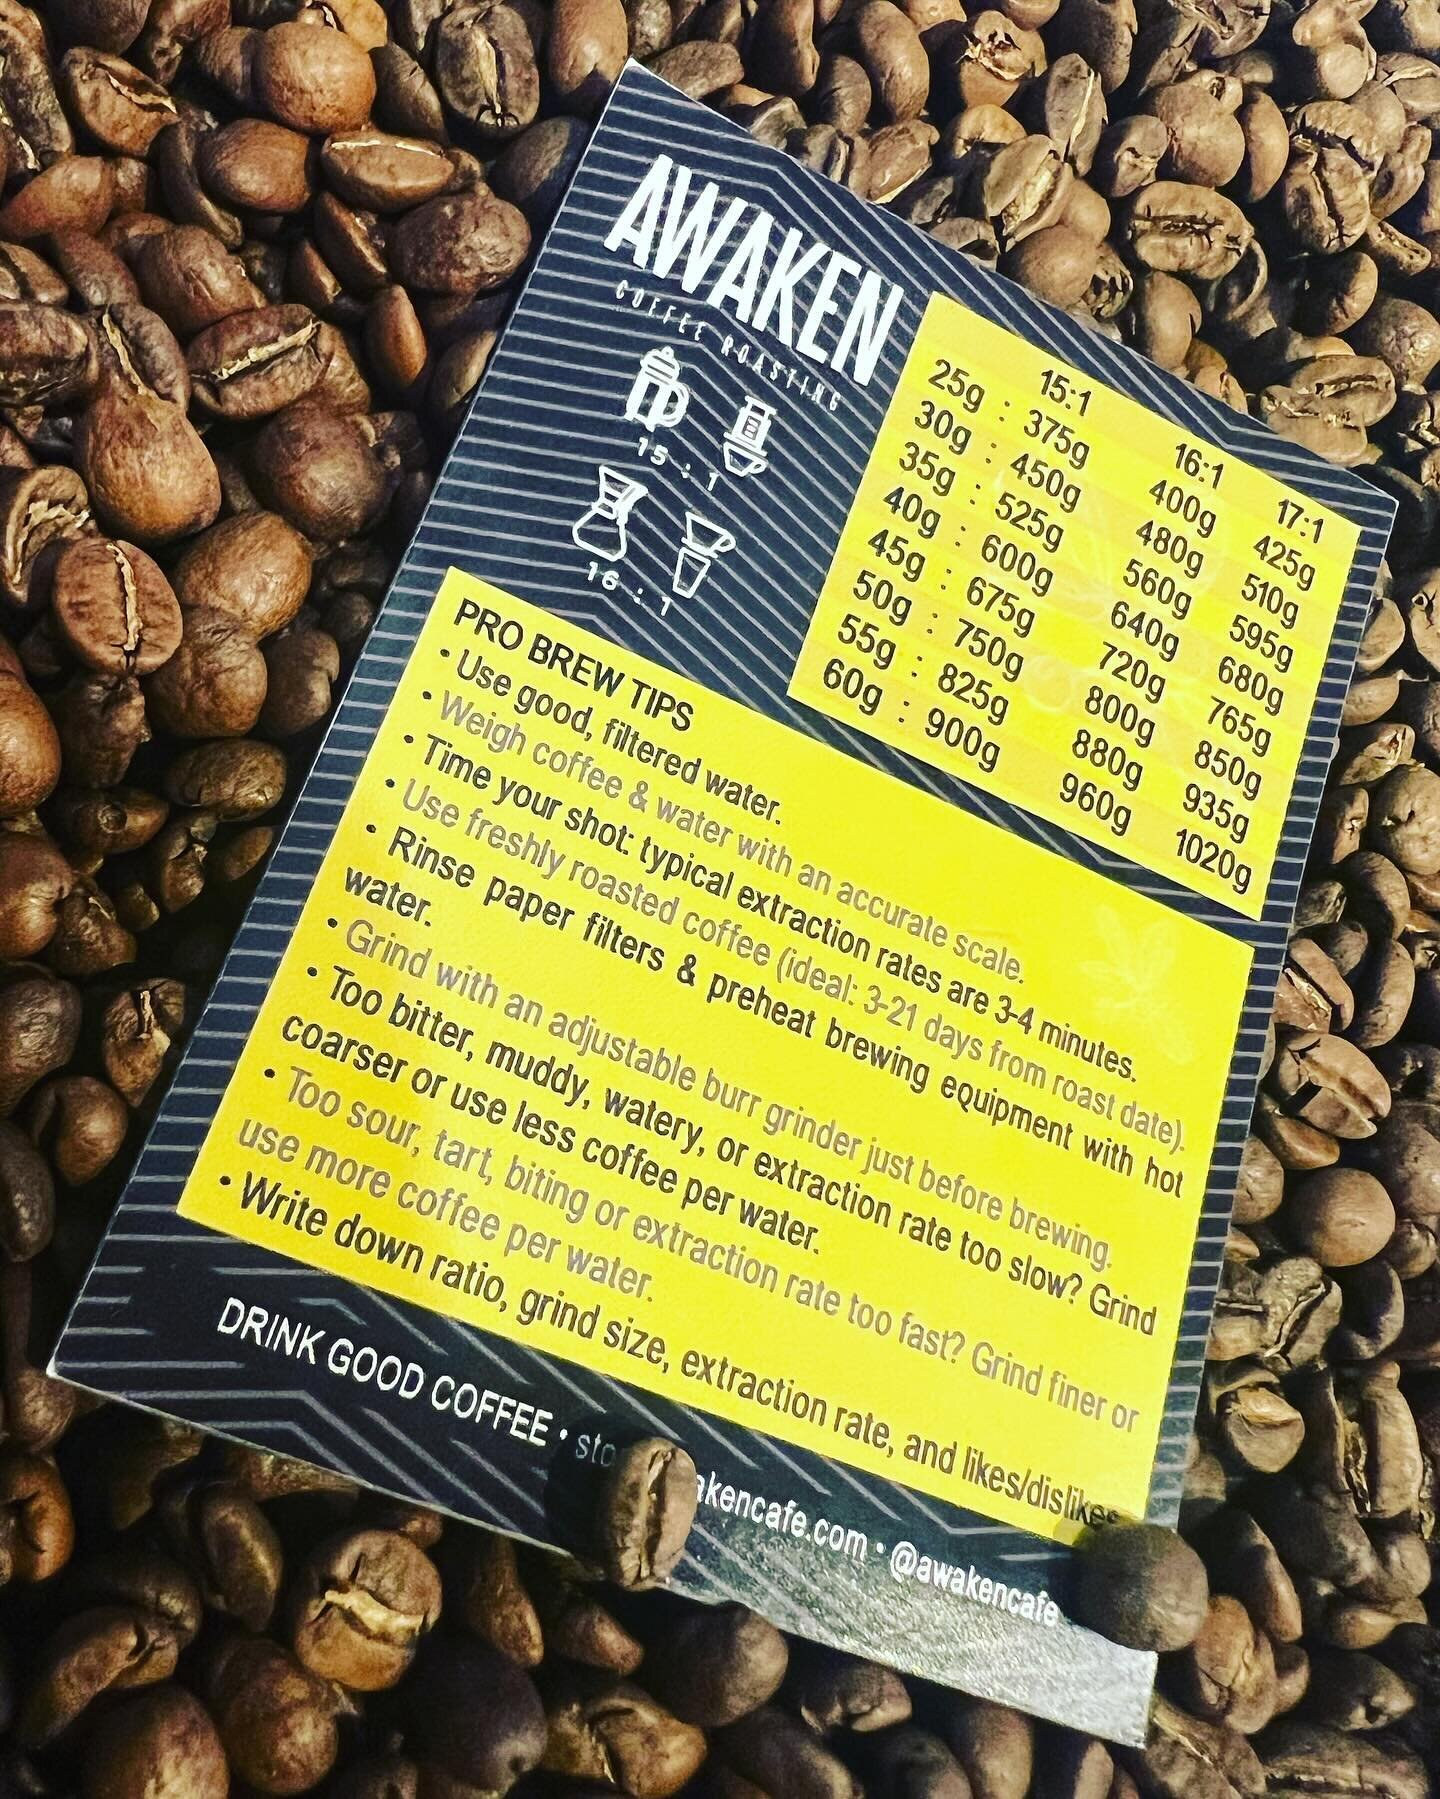 get a free brew ratio + pro brew tips magnet with purchase of a bag of coffee while supplies last. limit one per customer. order at store.awakencafe.com (link in bio)